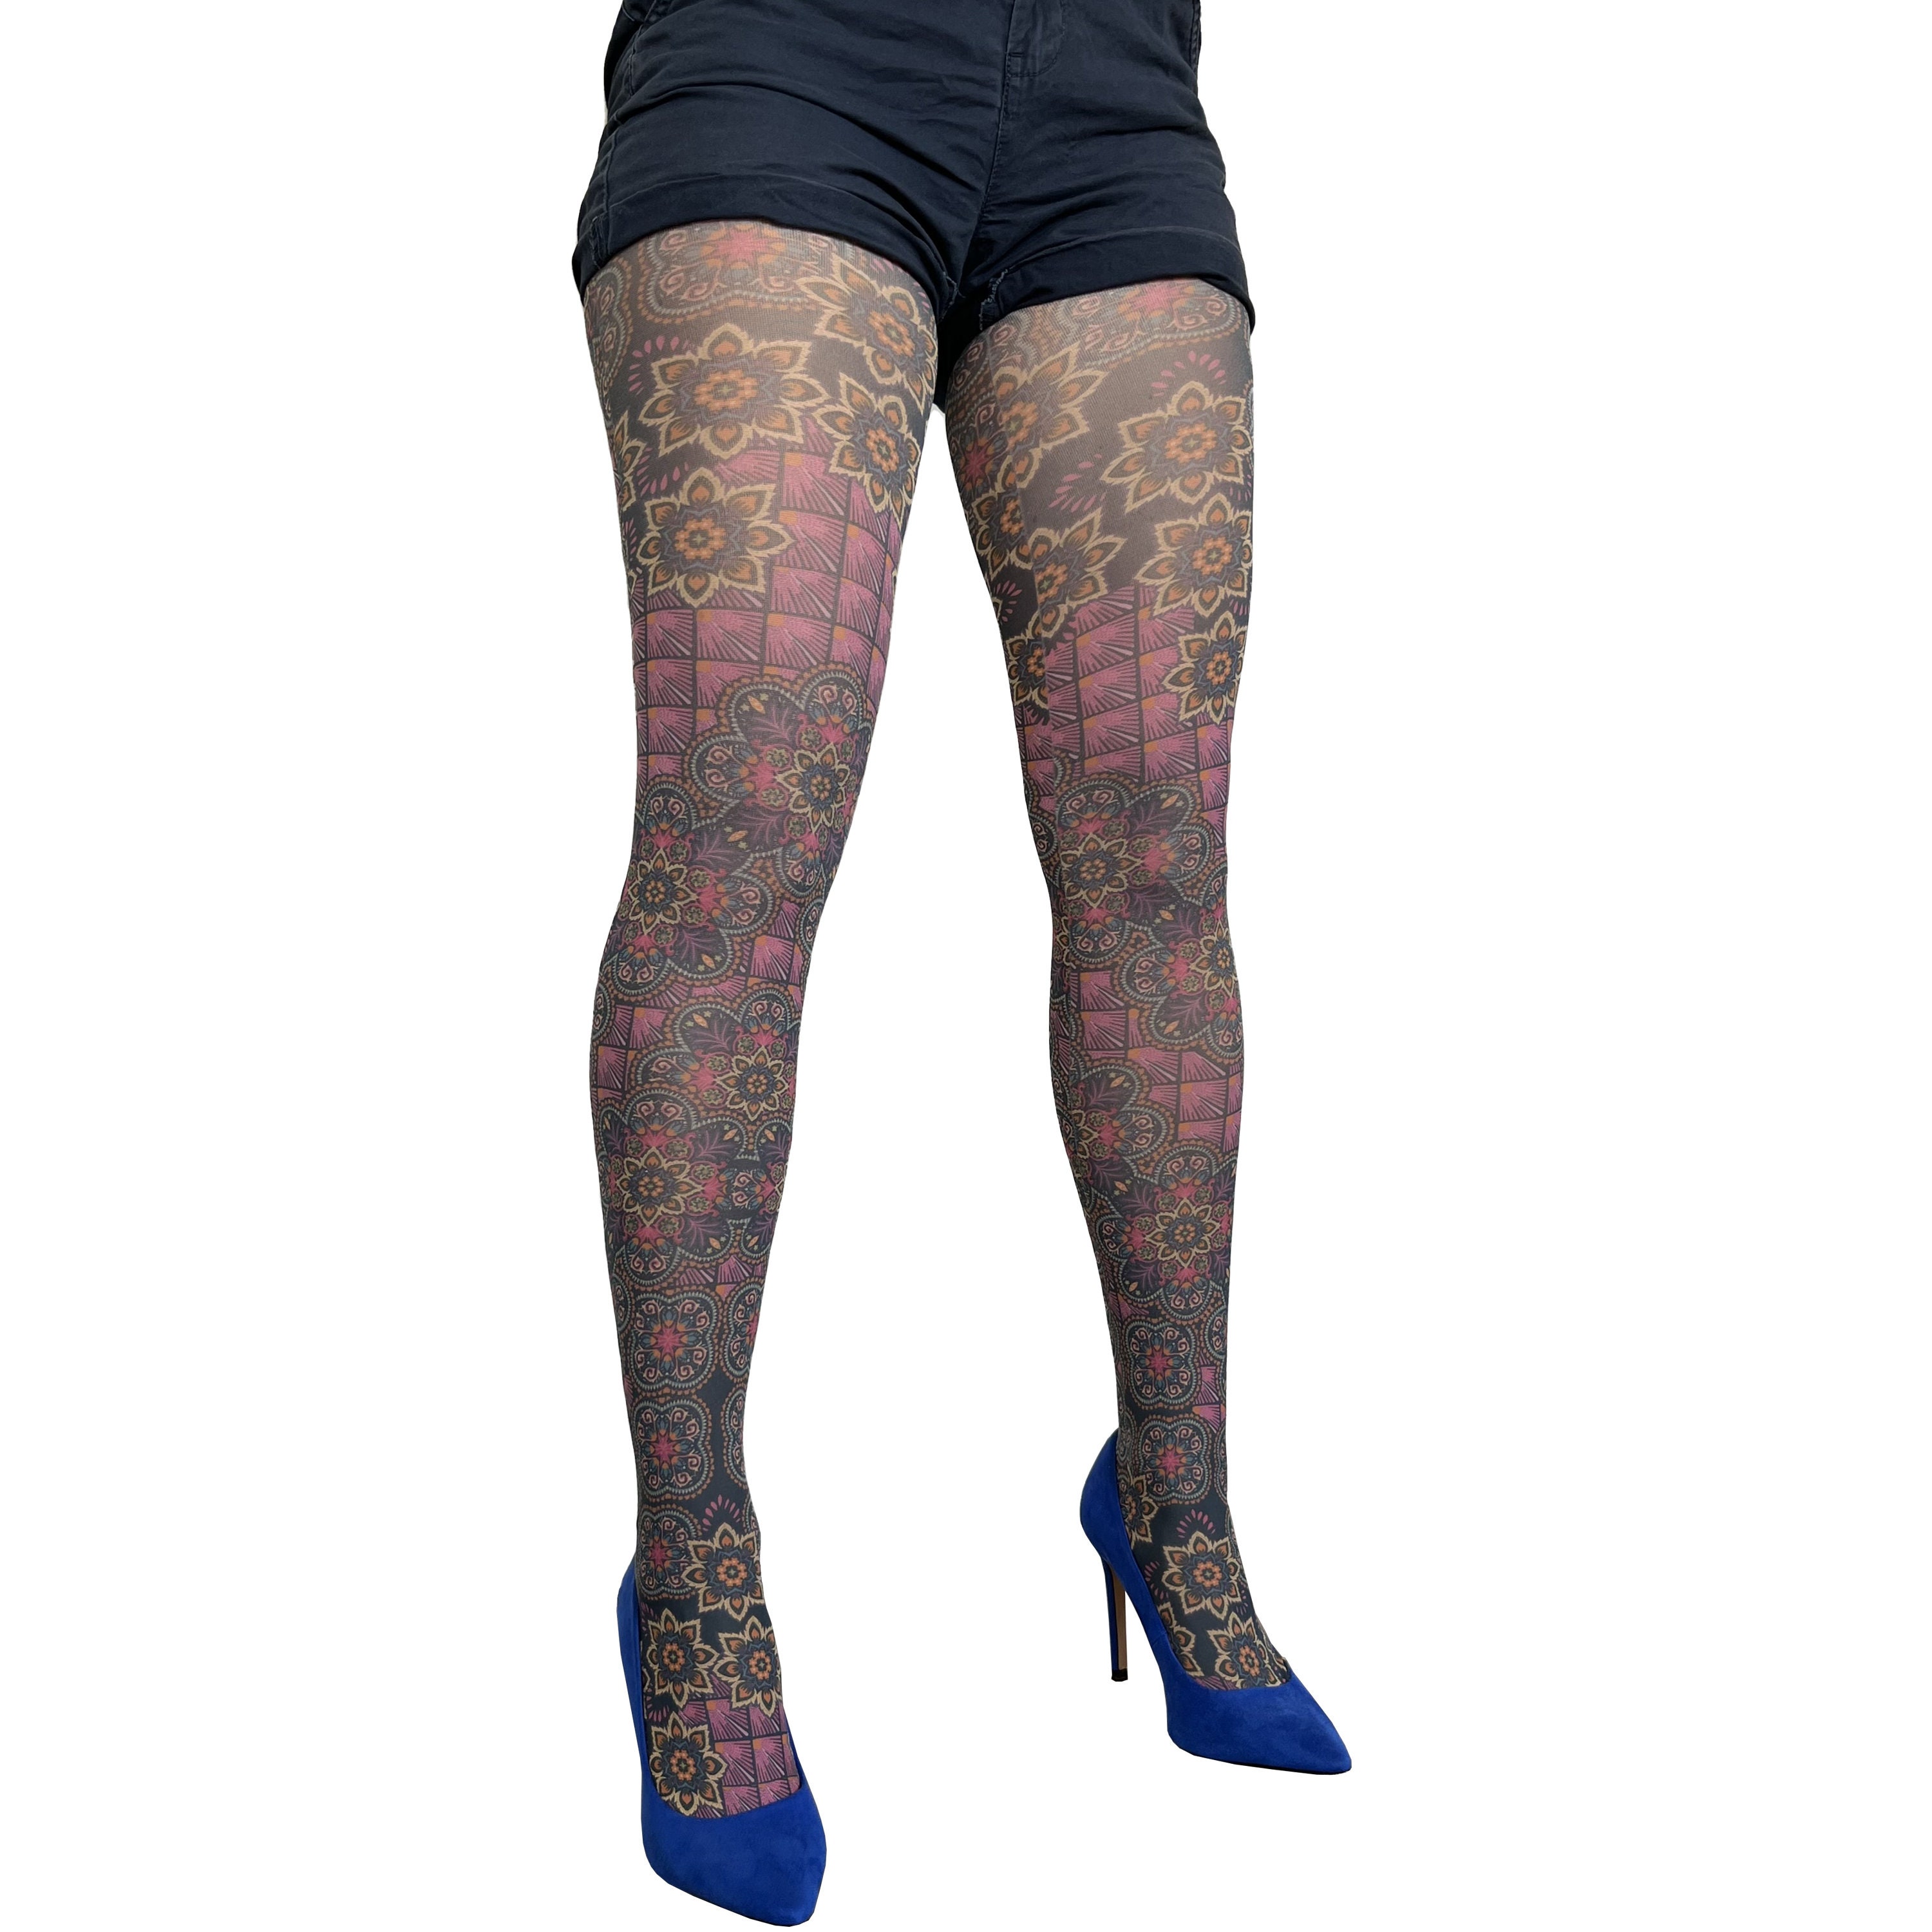 Purple Boho Chic Printed Tights Pantyhose for Women Available in Plus Size  Gift for Her -  Norway